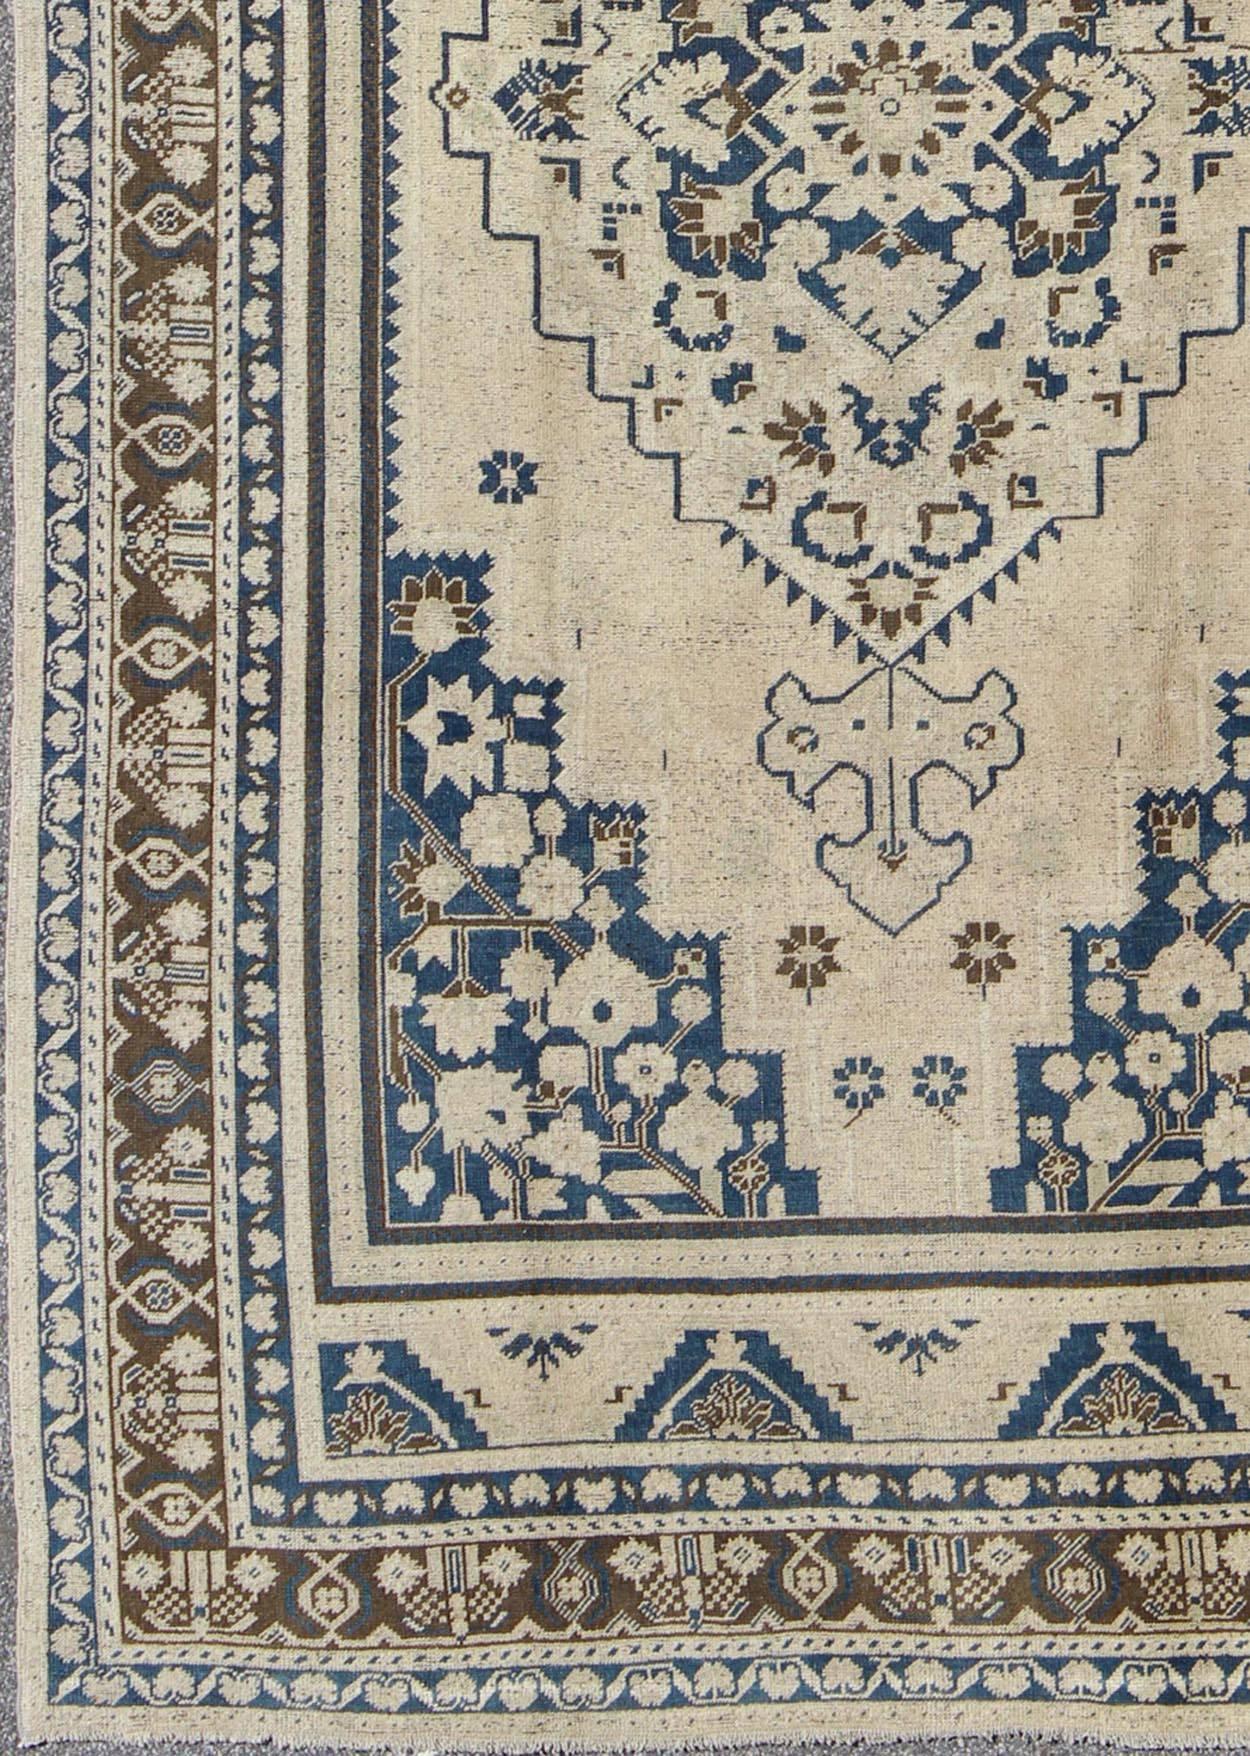 Vintage Turkish Oushak rug with medium blue, steel blue, brown and cream colors, Rug TU-UGU-54, country of origin / type: Turkey / Oushak, circa mid-20th century.

Measures: 6.8 x 11.4

This exquisite vintage Turkish Oushak features a medallion